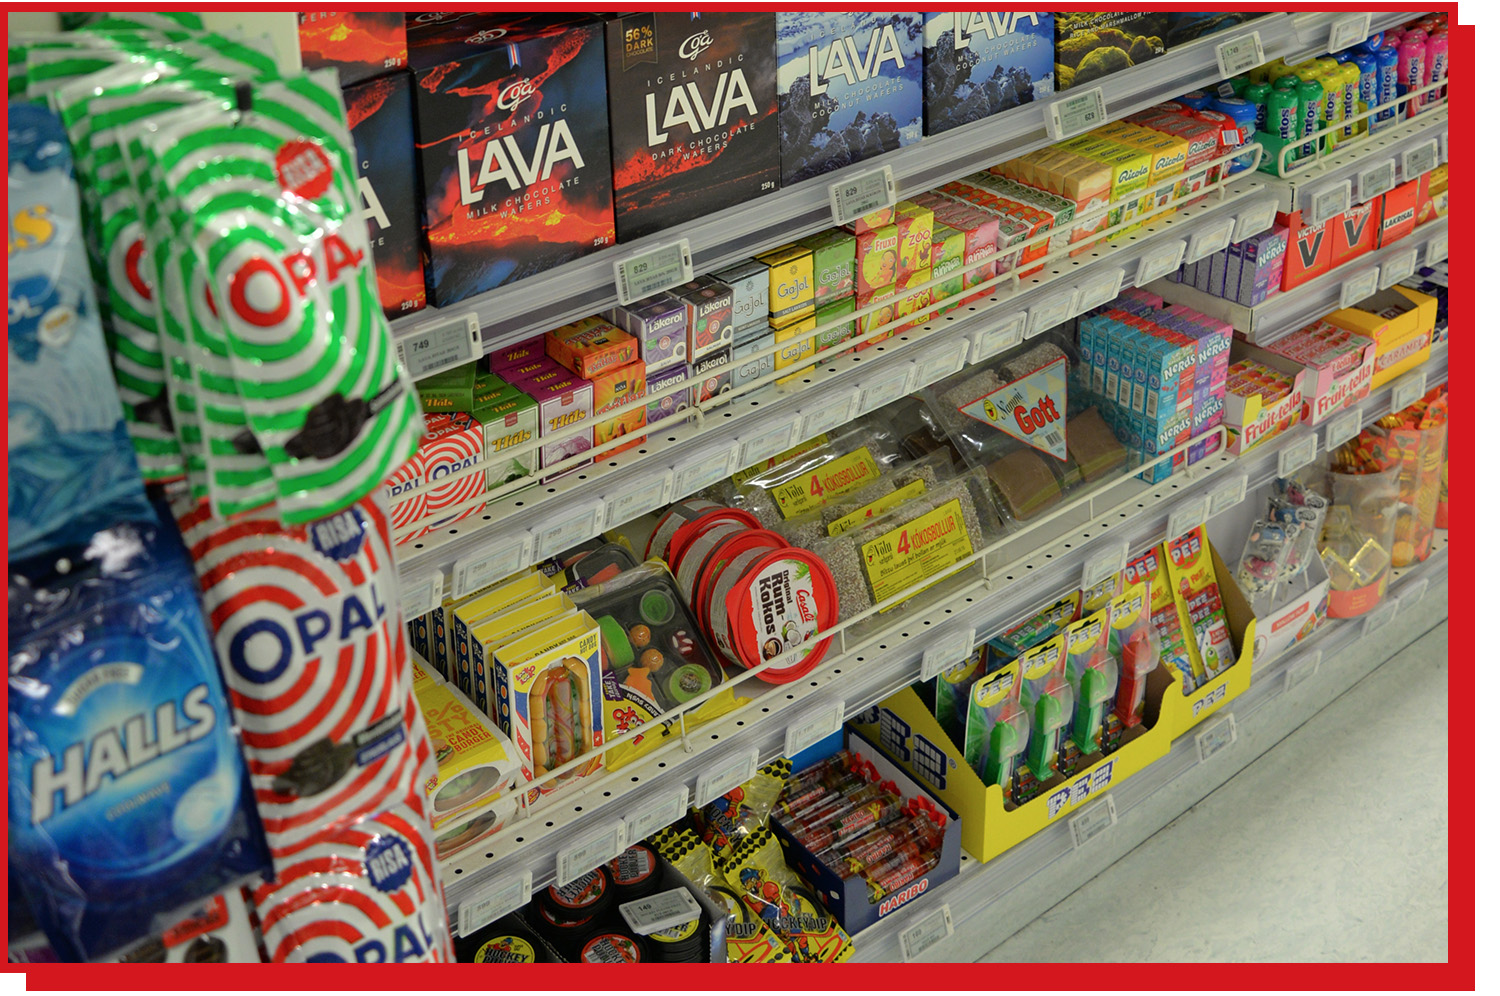 Candy and snacks in a supermarket aisle in Iceland.